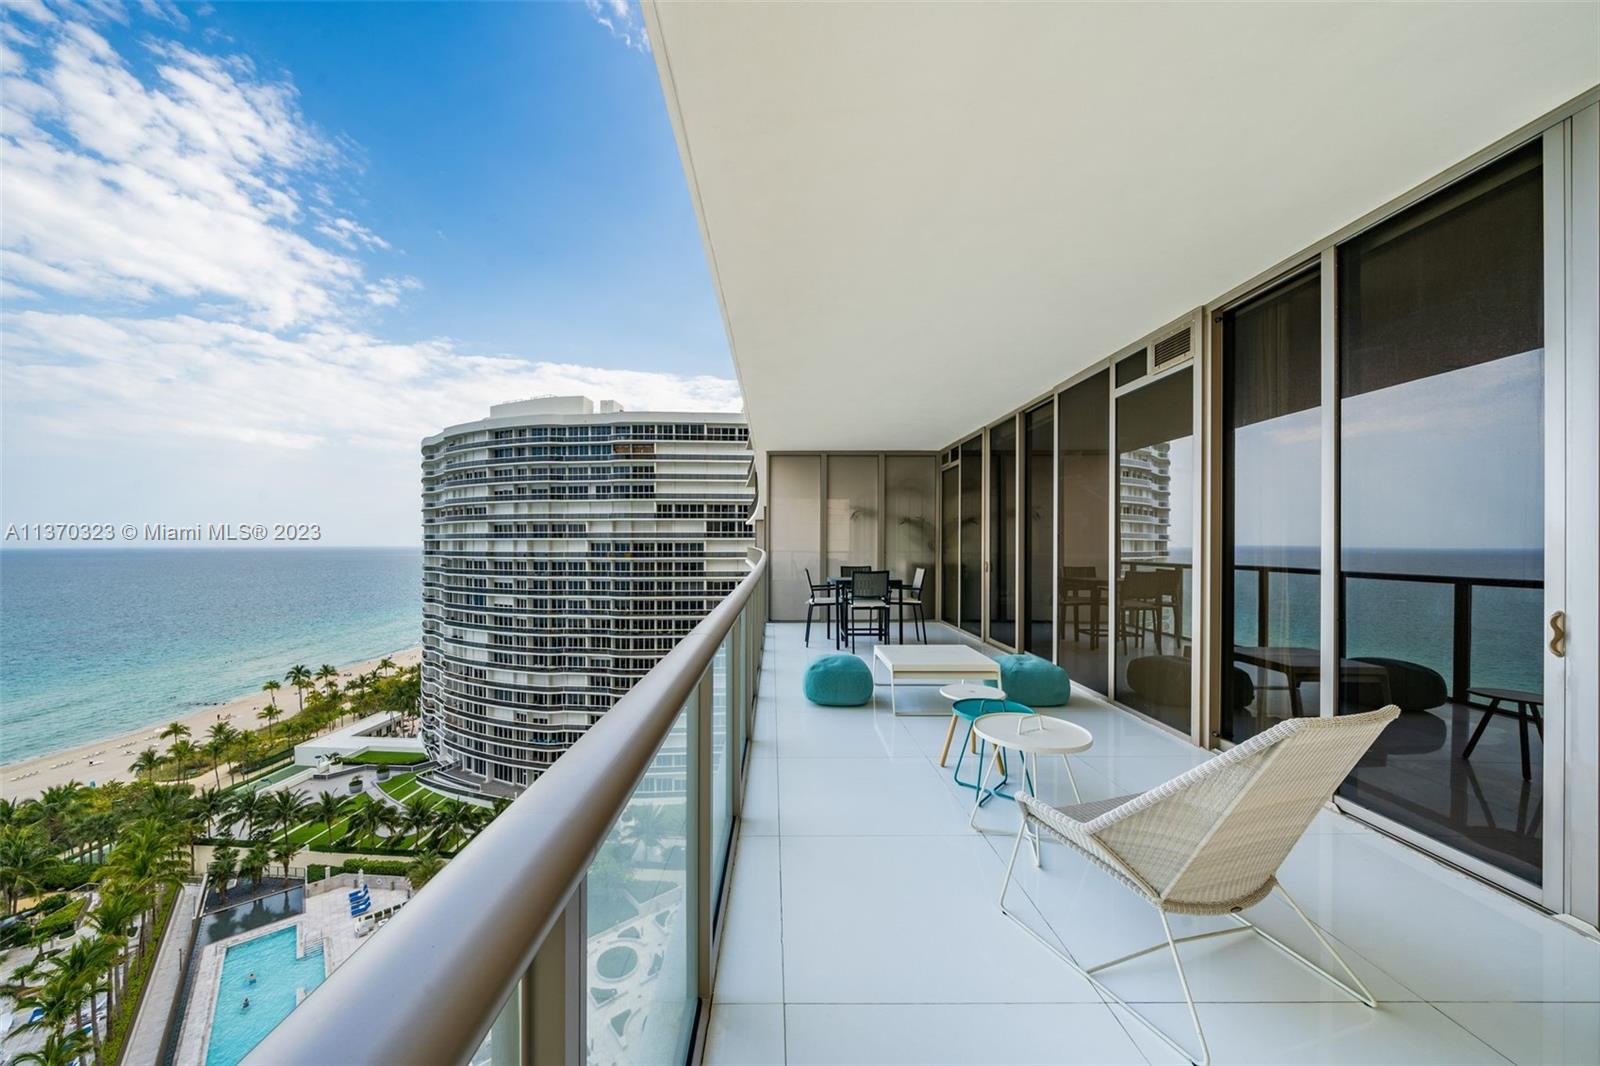 Condo for Sale in Bal Harbour, FL